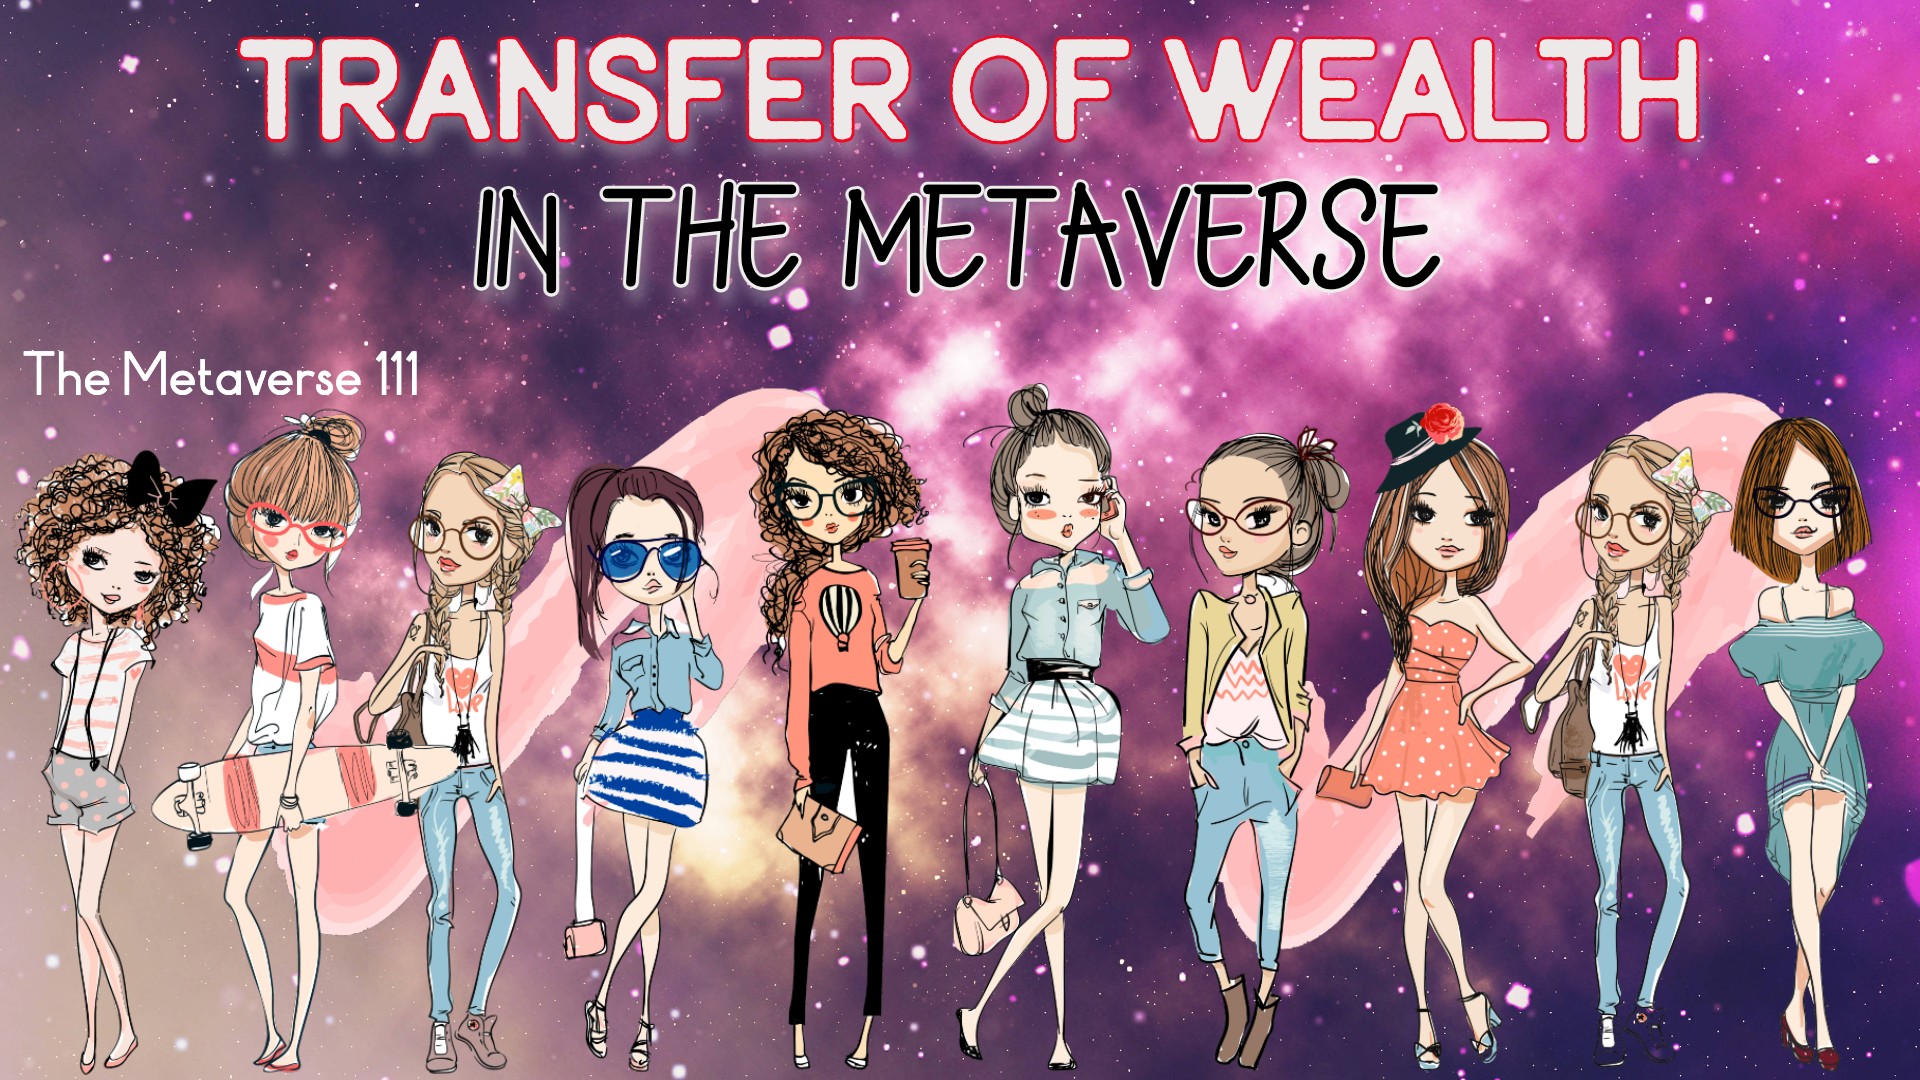 The Metaverse 111: Transfer of Wealth in the Metaverse